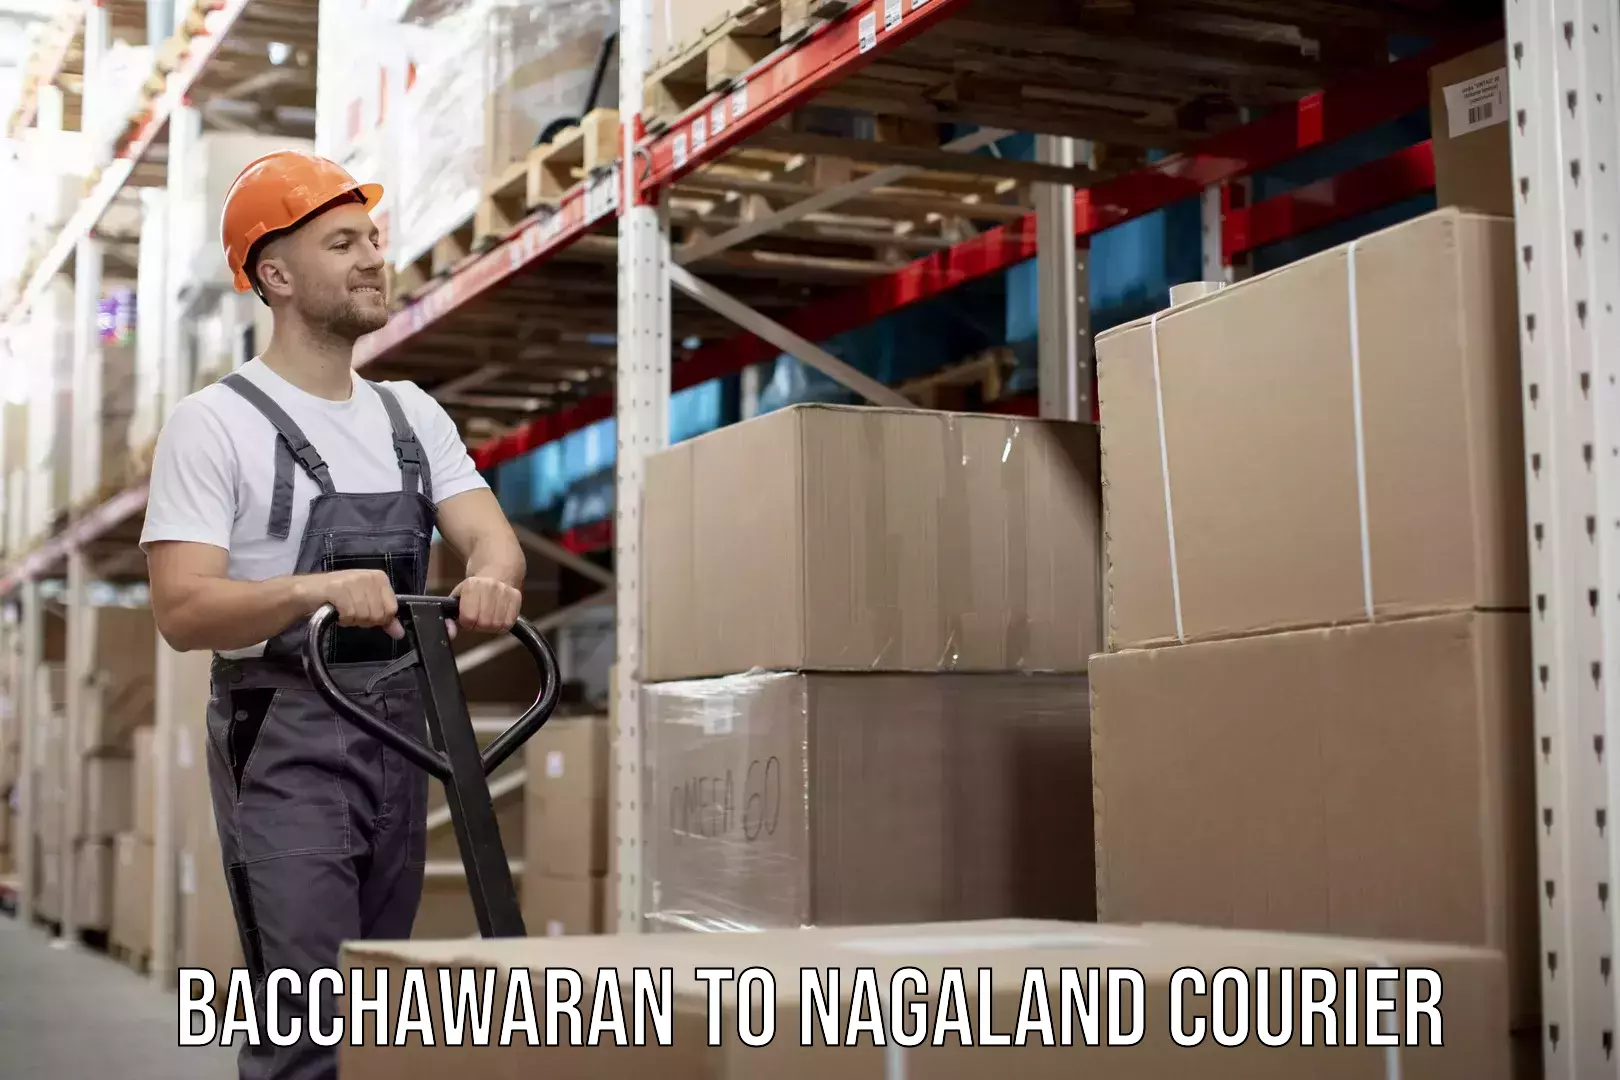 Remote area delivery Bacchawaran to Nagaland